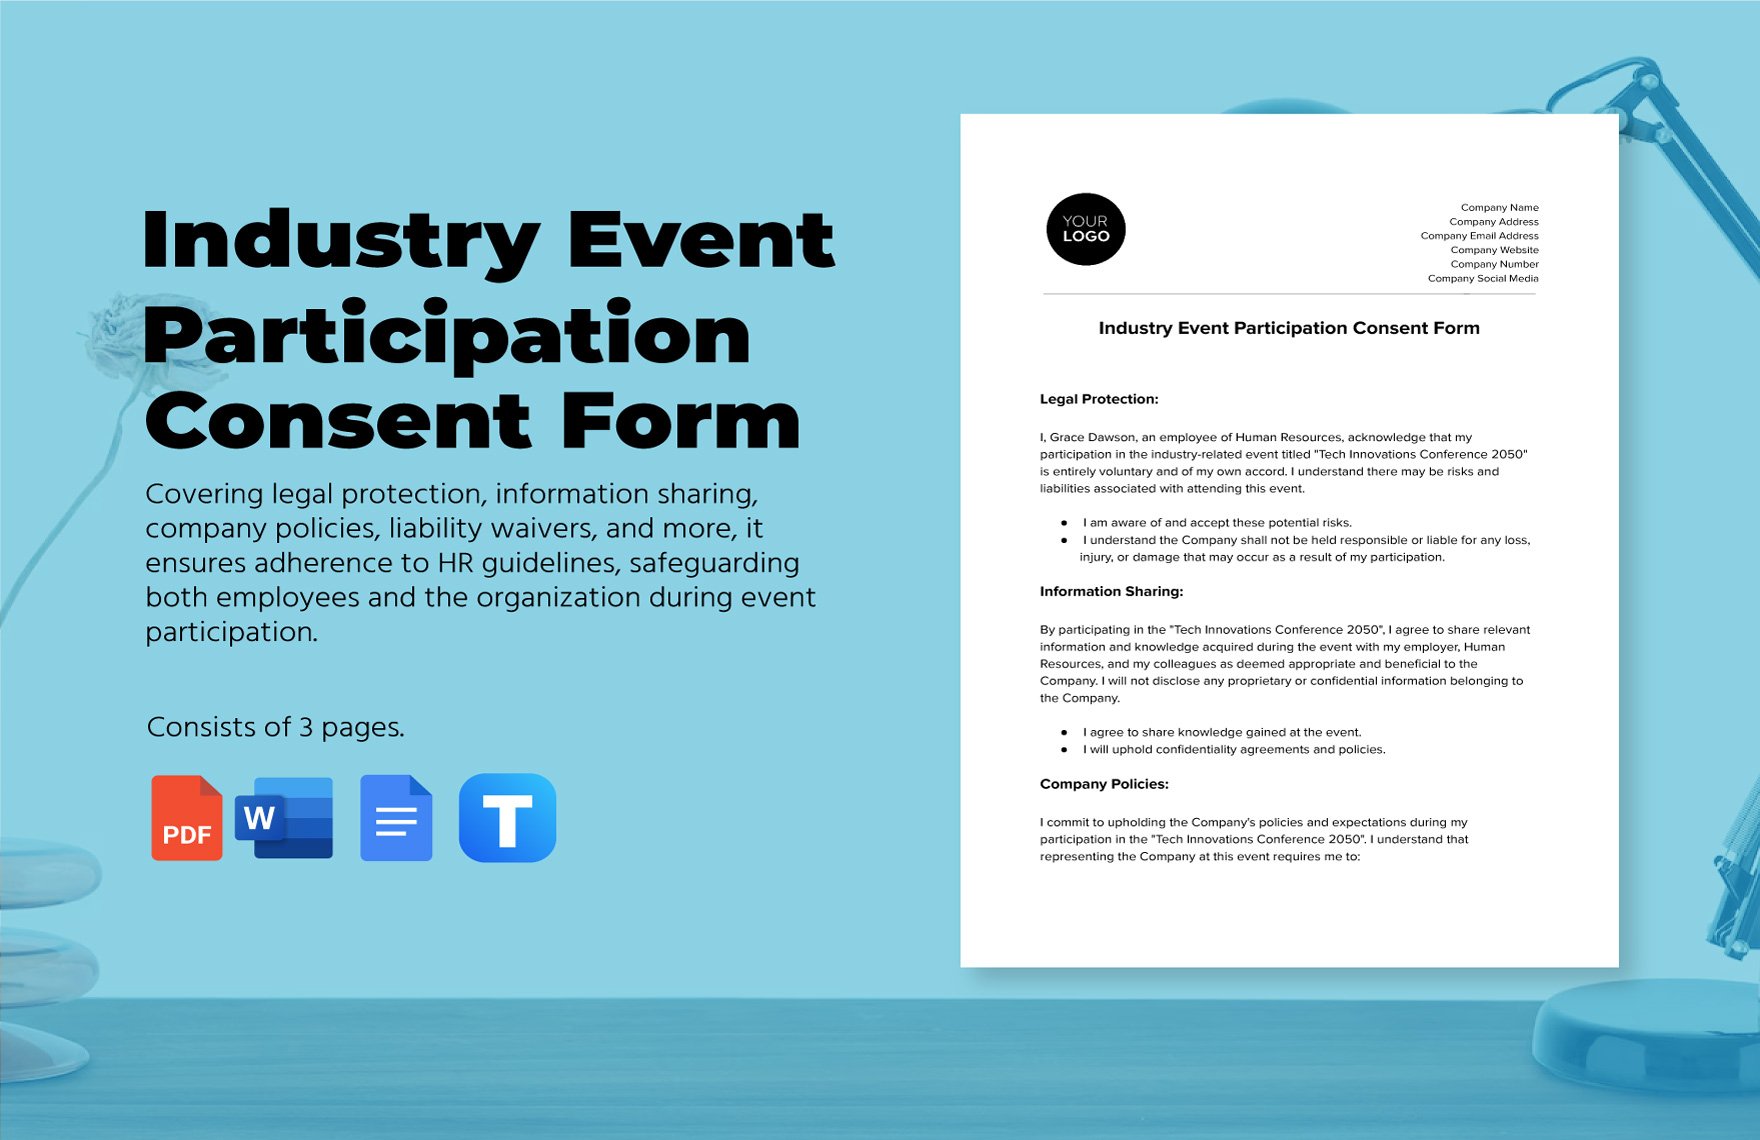 Industry Event Participation Consent Form HR Template in Word, Google Docs, PDF